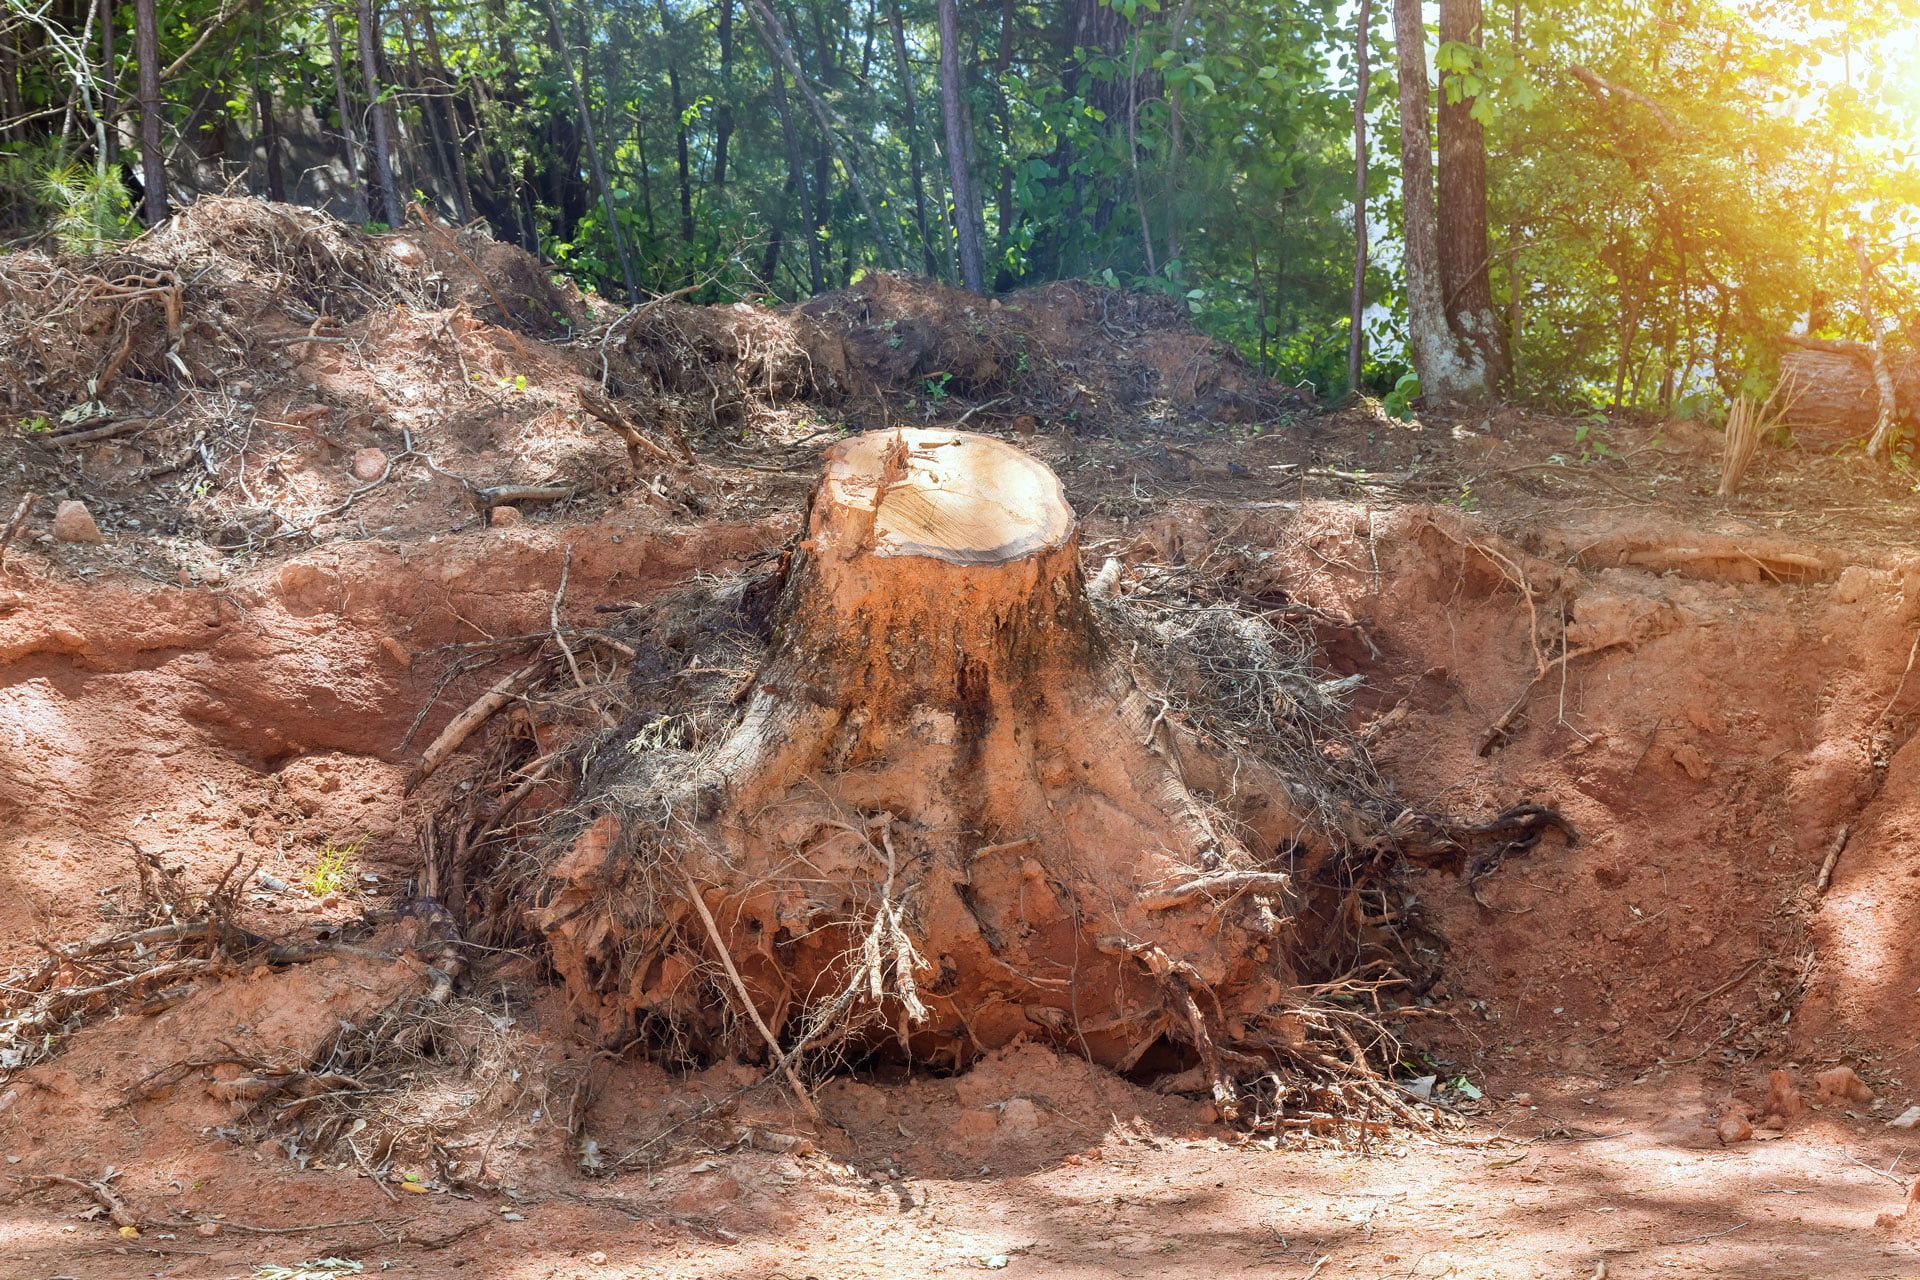 A tree stump is sitting in the middle of a dirt field